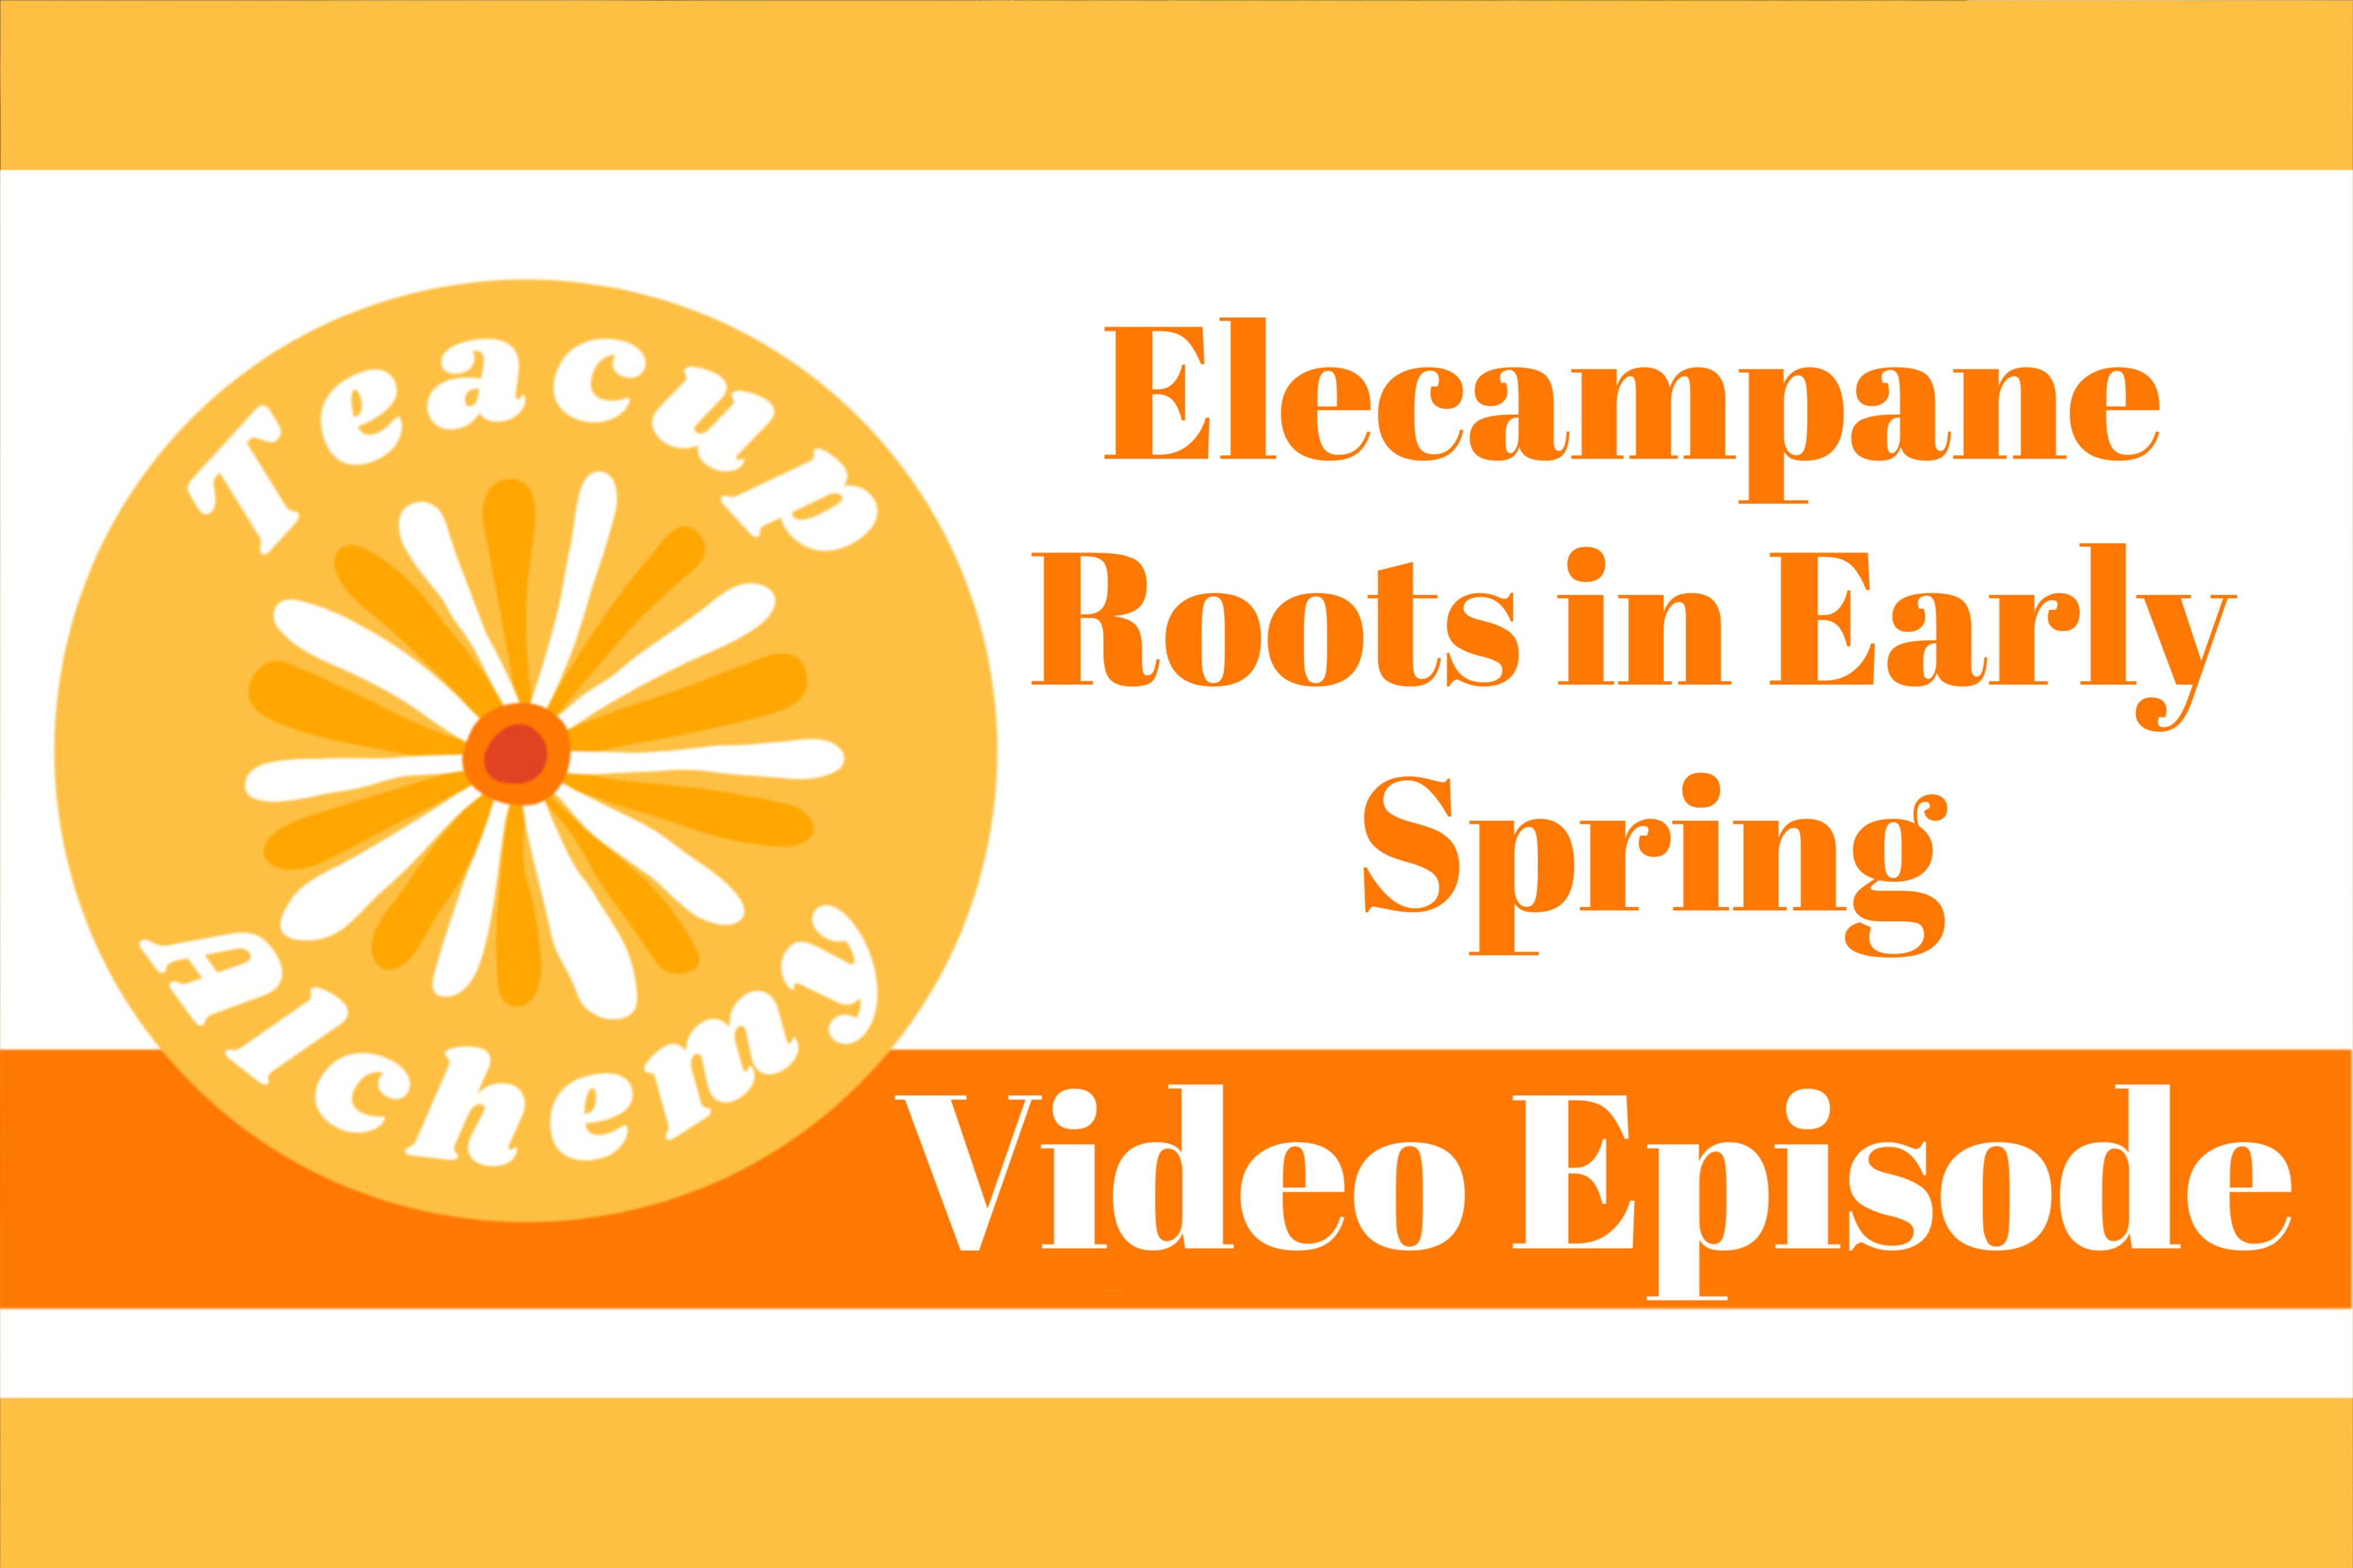 A Look at Elecampane Roots in Early Spring